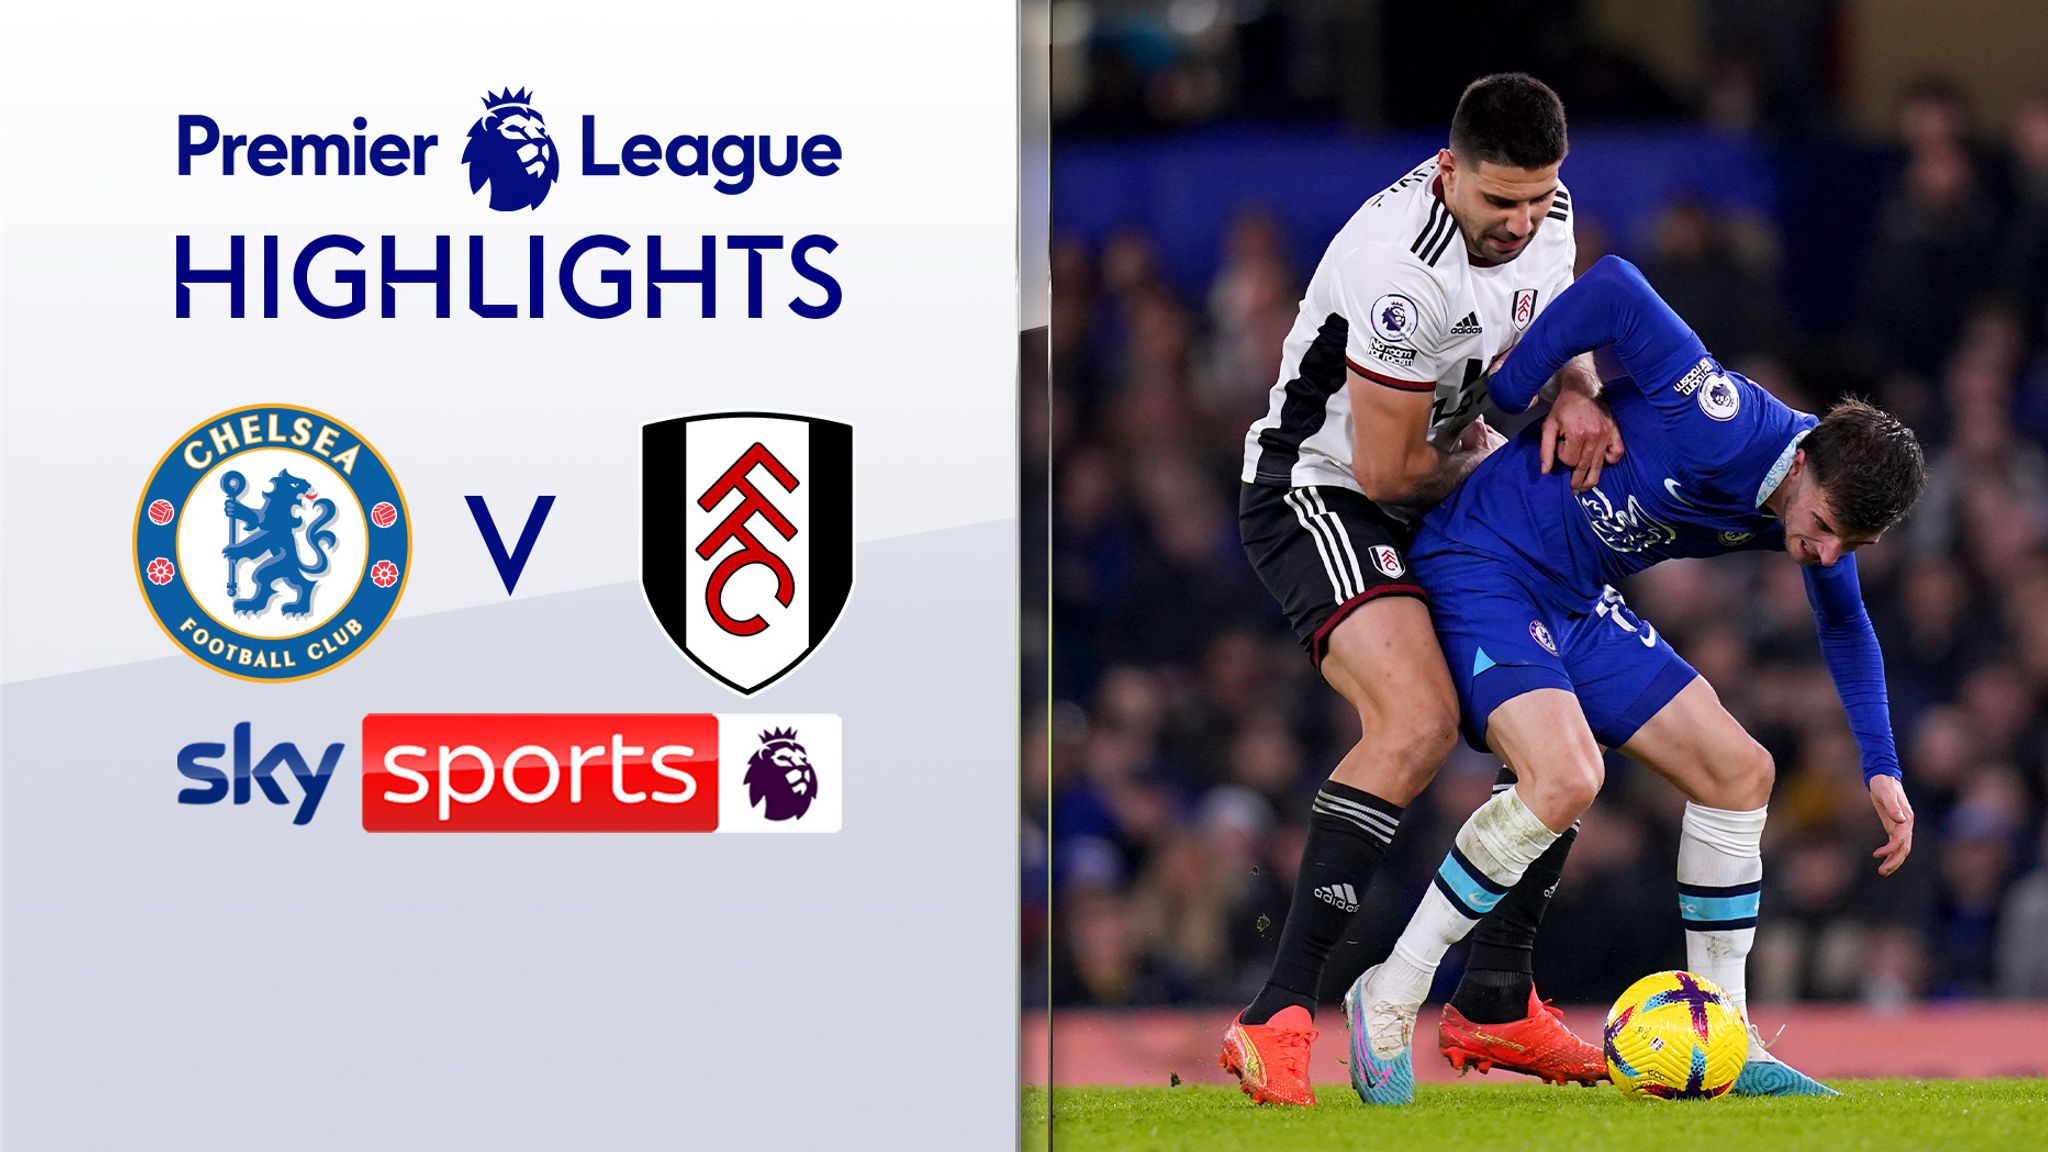 Chelsea 0-0 Fulham Premier League highlights Video Watch TV Show Sky Sports